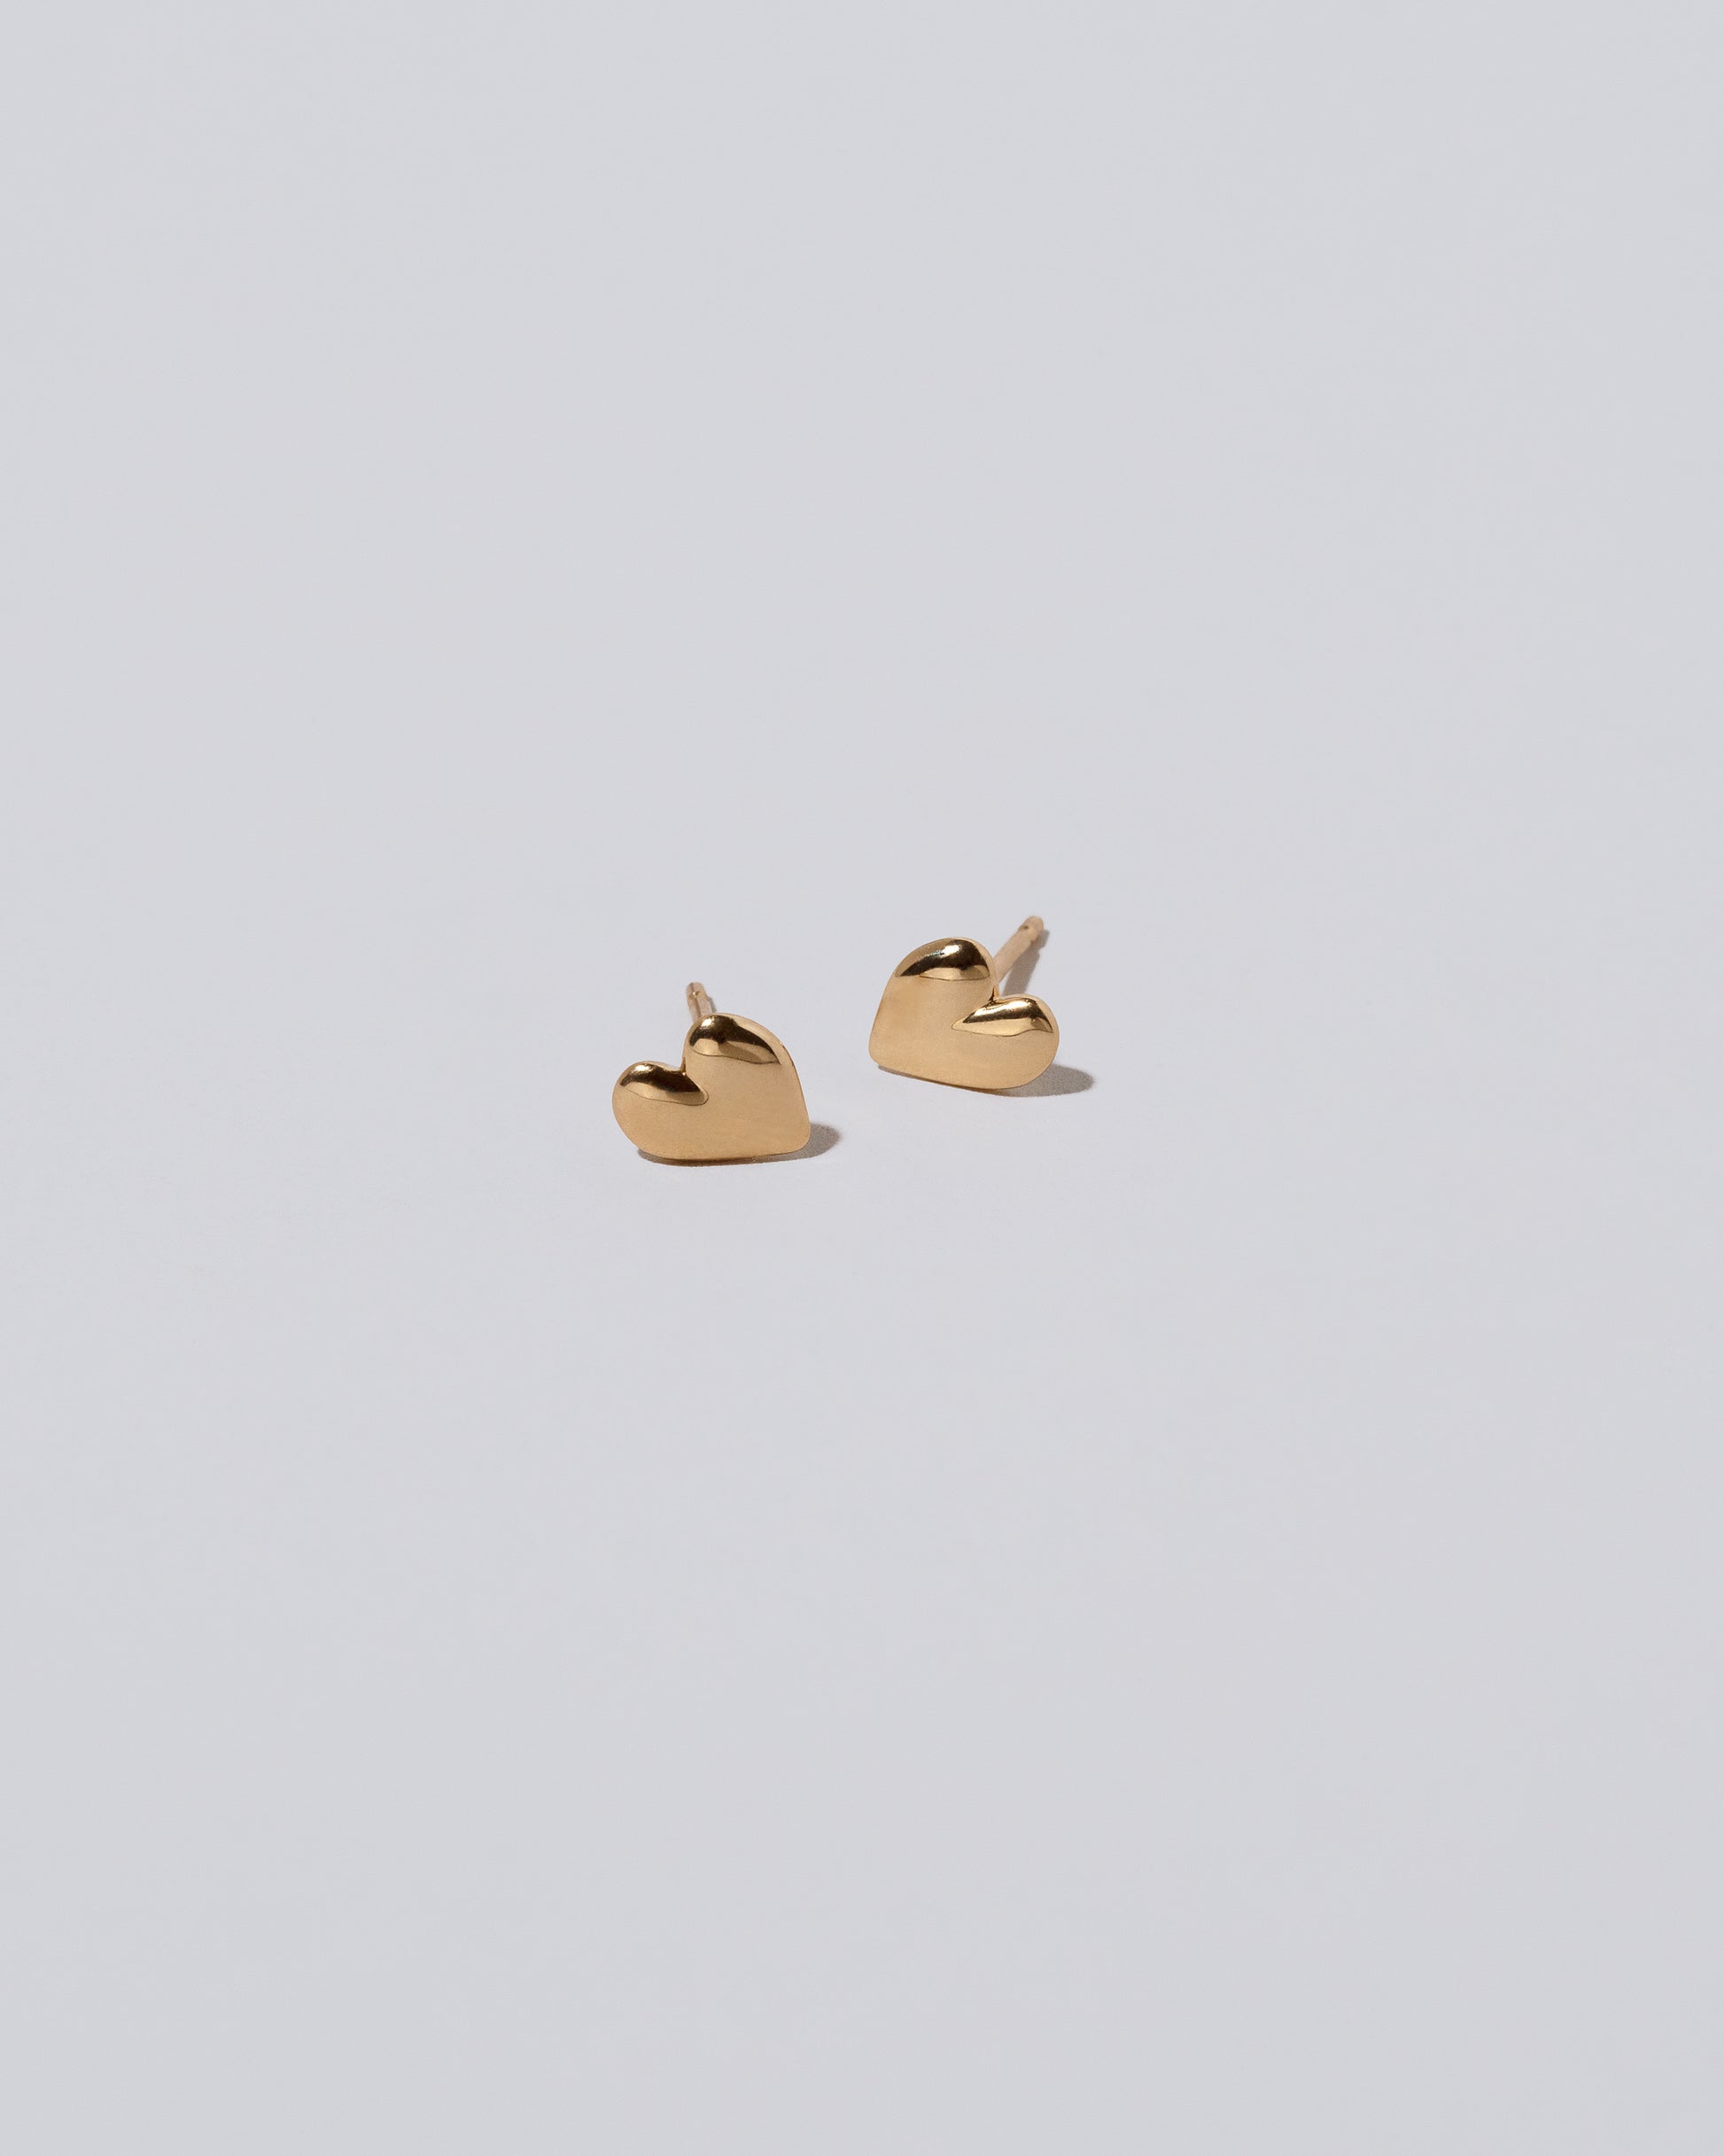 Gold Small Thousand & One Night Heart Stud Earrings on light color background.